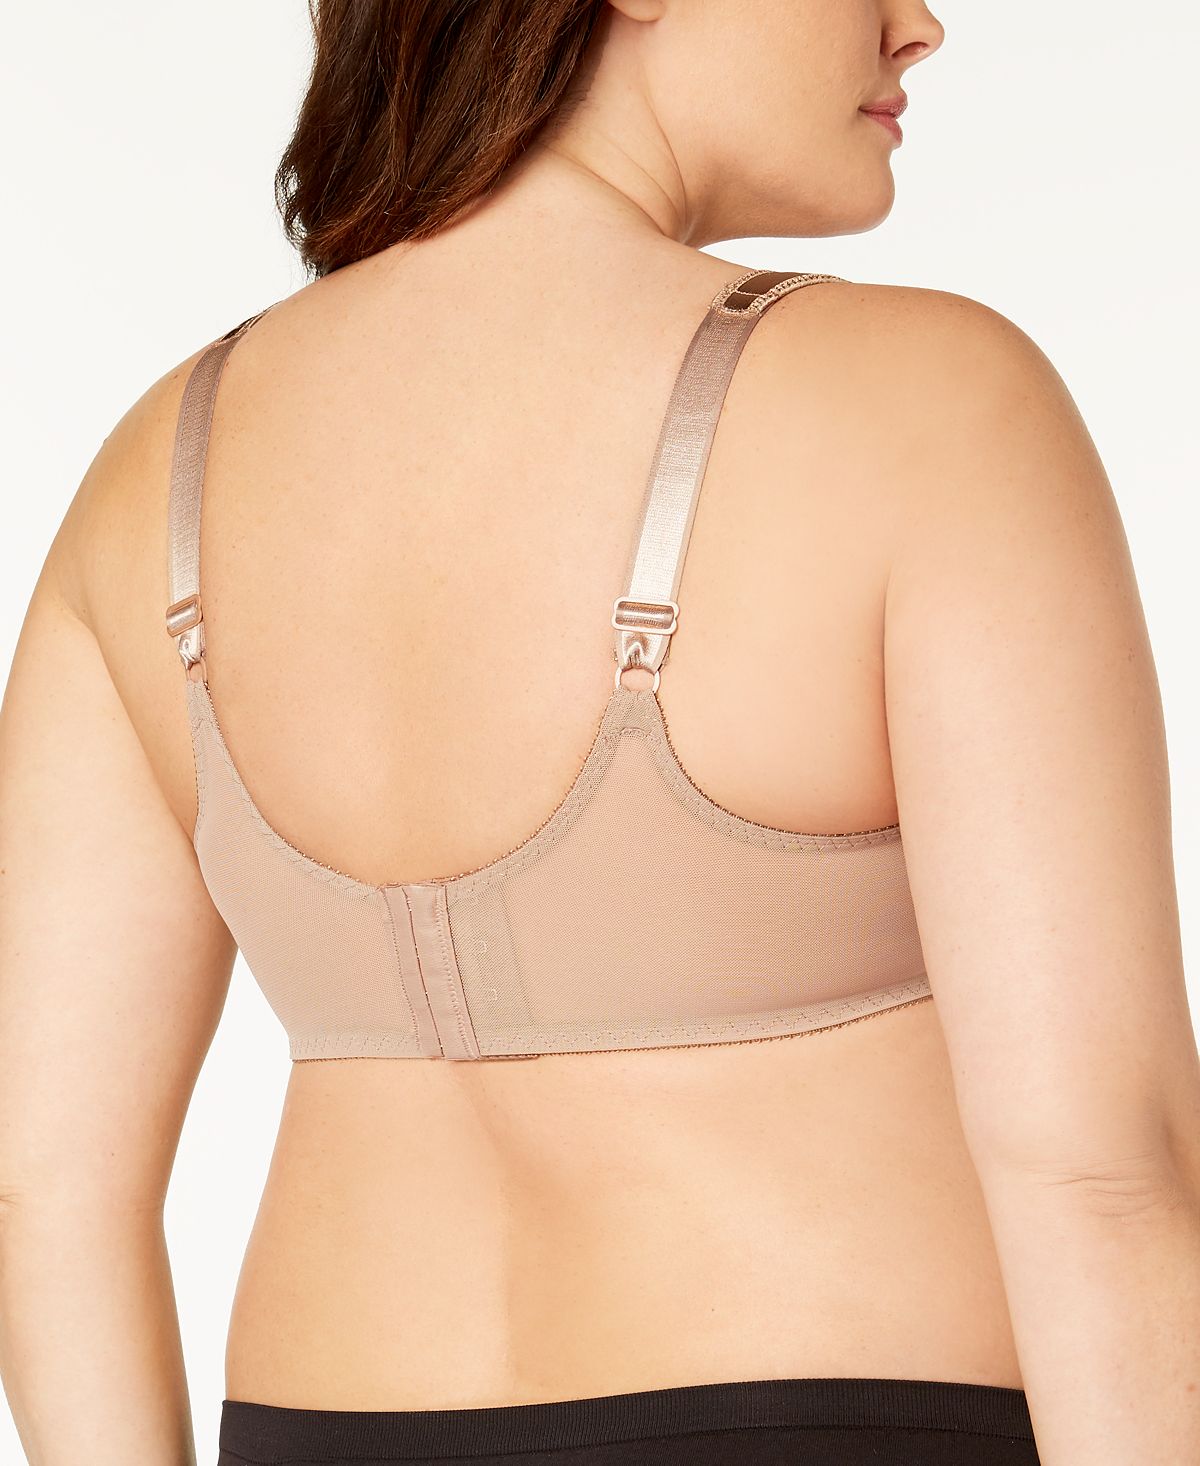 Buy Bali Passion for Smoothing & Light Lift Underwire Bra, Latte